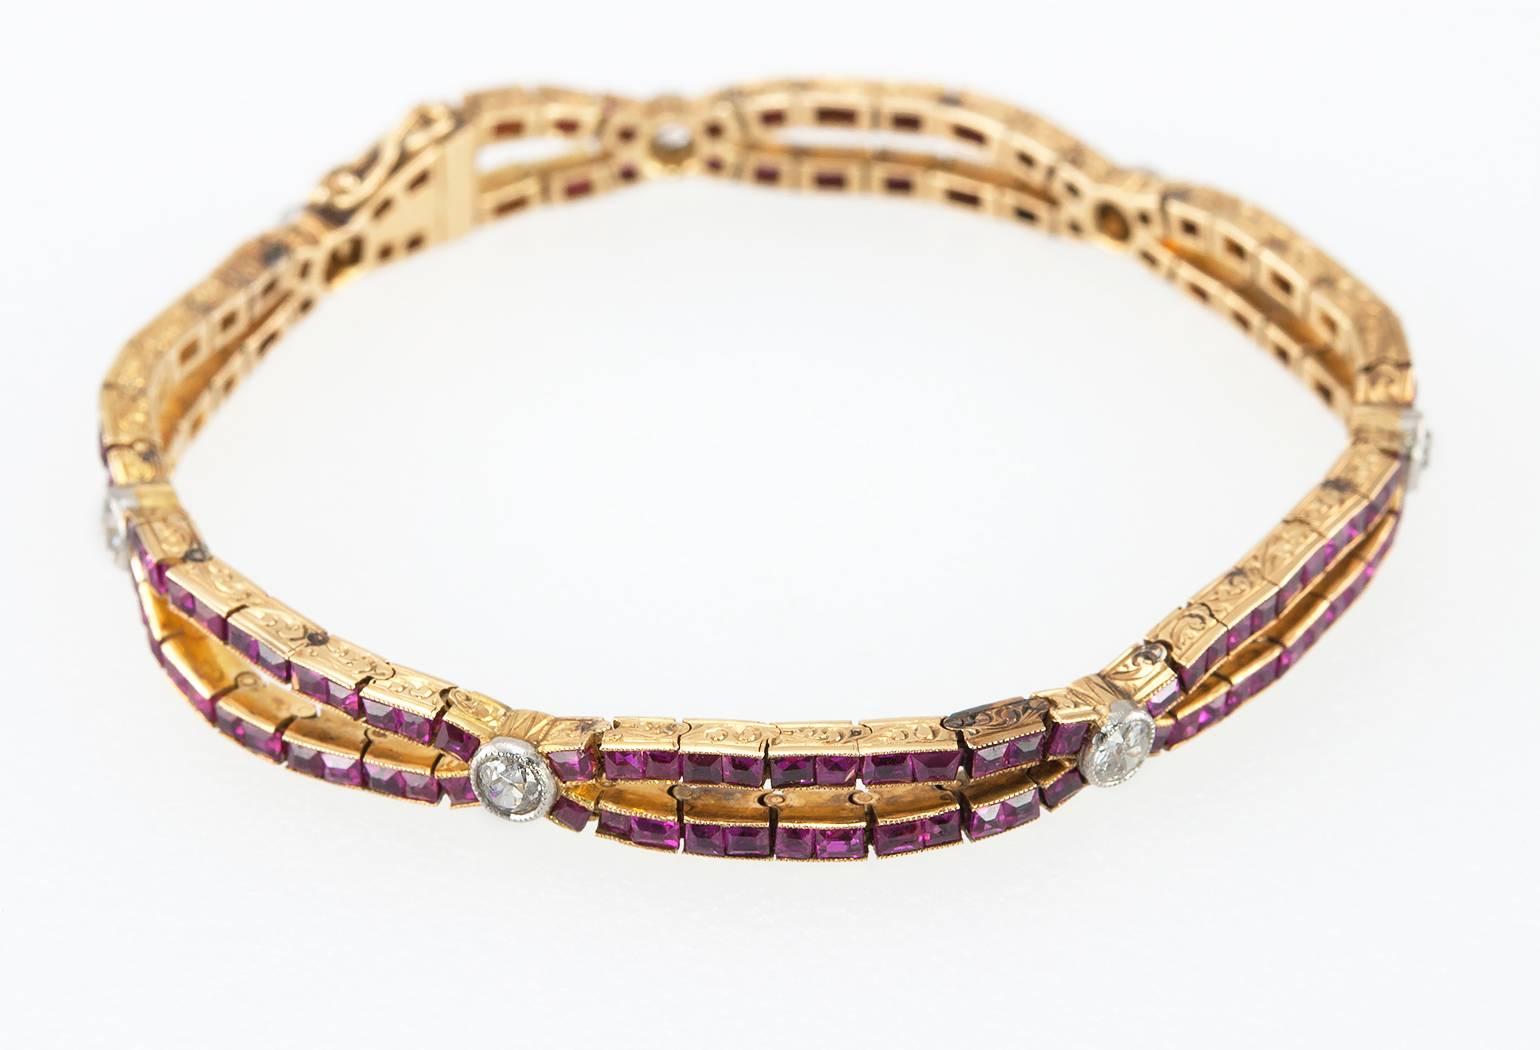 A stunning Edwardian ruby link bracelet in 18 karat yellow gold with platinum topped diamonds from circa 1910.  This truly special bracelet consists of 7 Old European Cut diamonds, approximately 1 carat in total diamond weight, bezel set in platinum